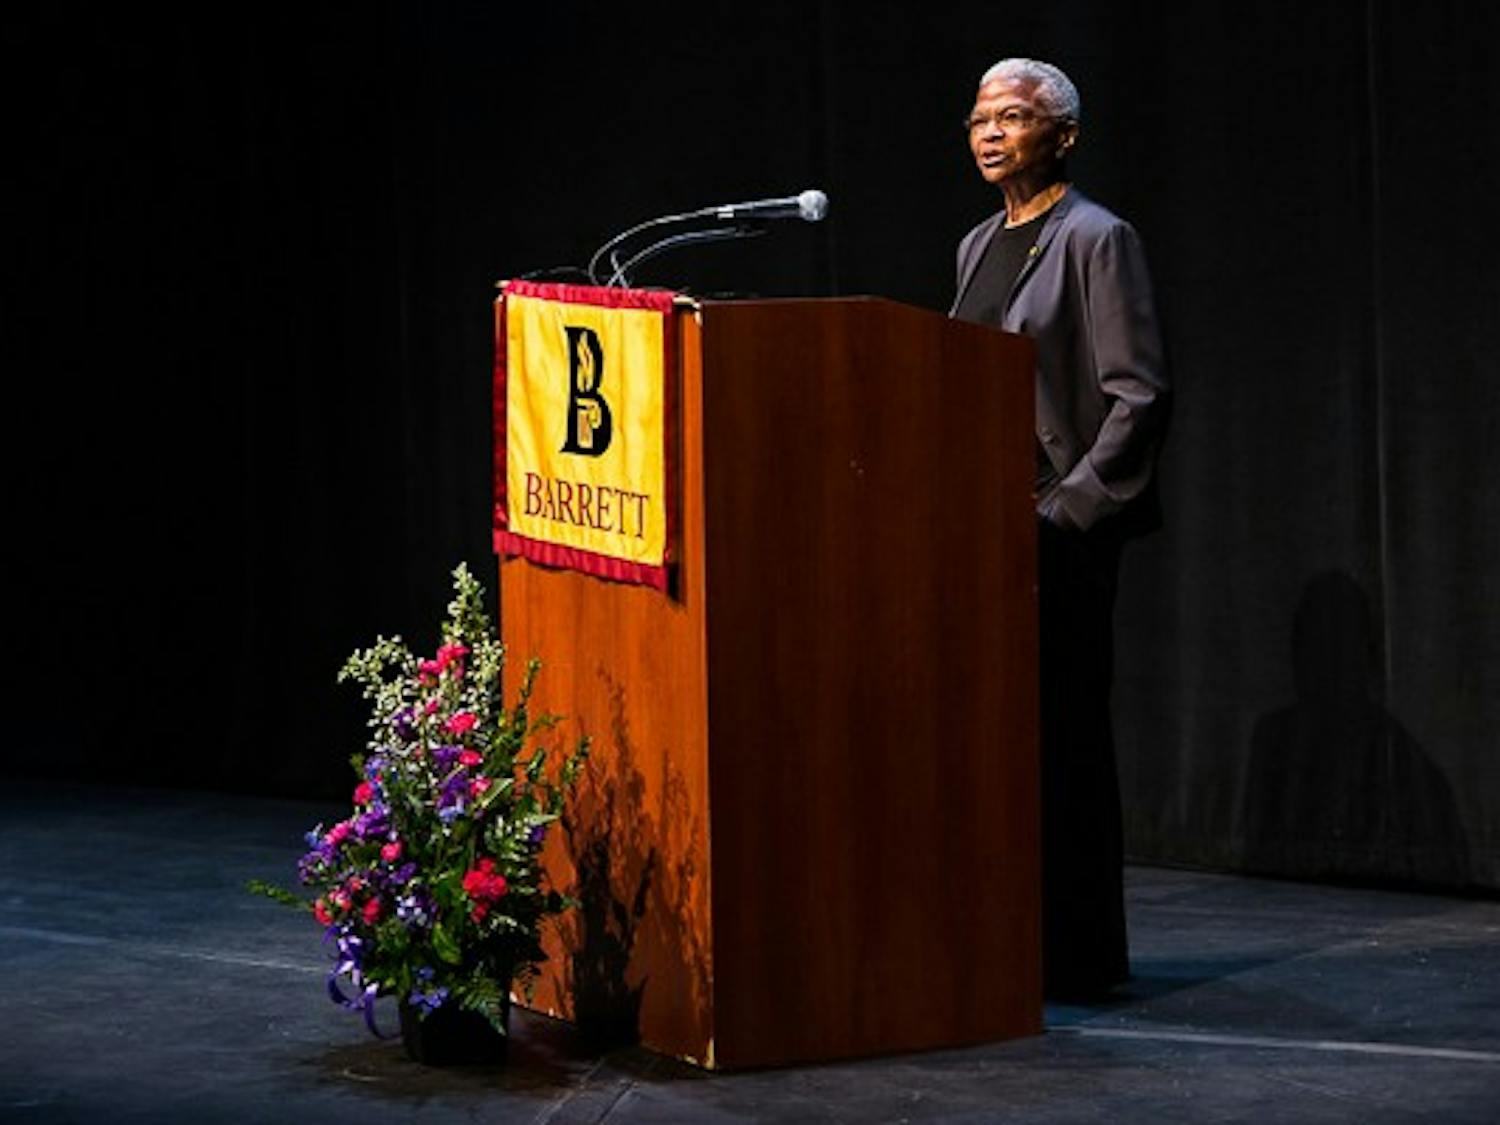 Dr. Mary Frances Berry speaks at the John J. Rhodes Lecture in Public Policy & American Institutions at the Galvin Playhouse on Wednesday, Feb. 25, 2015. In the lecture, presented by Barrett, the Honors College, Berry covered a variety of human and civil rights issues and challenged the audience to make a change for justice. (Daniel Kwon/The State Press)